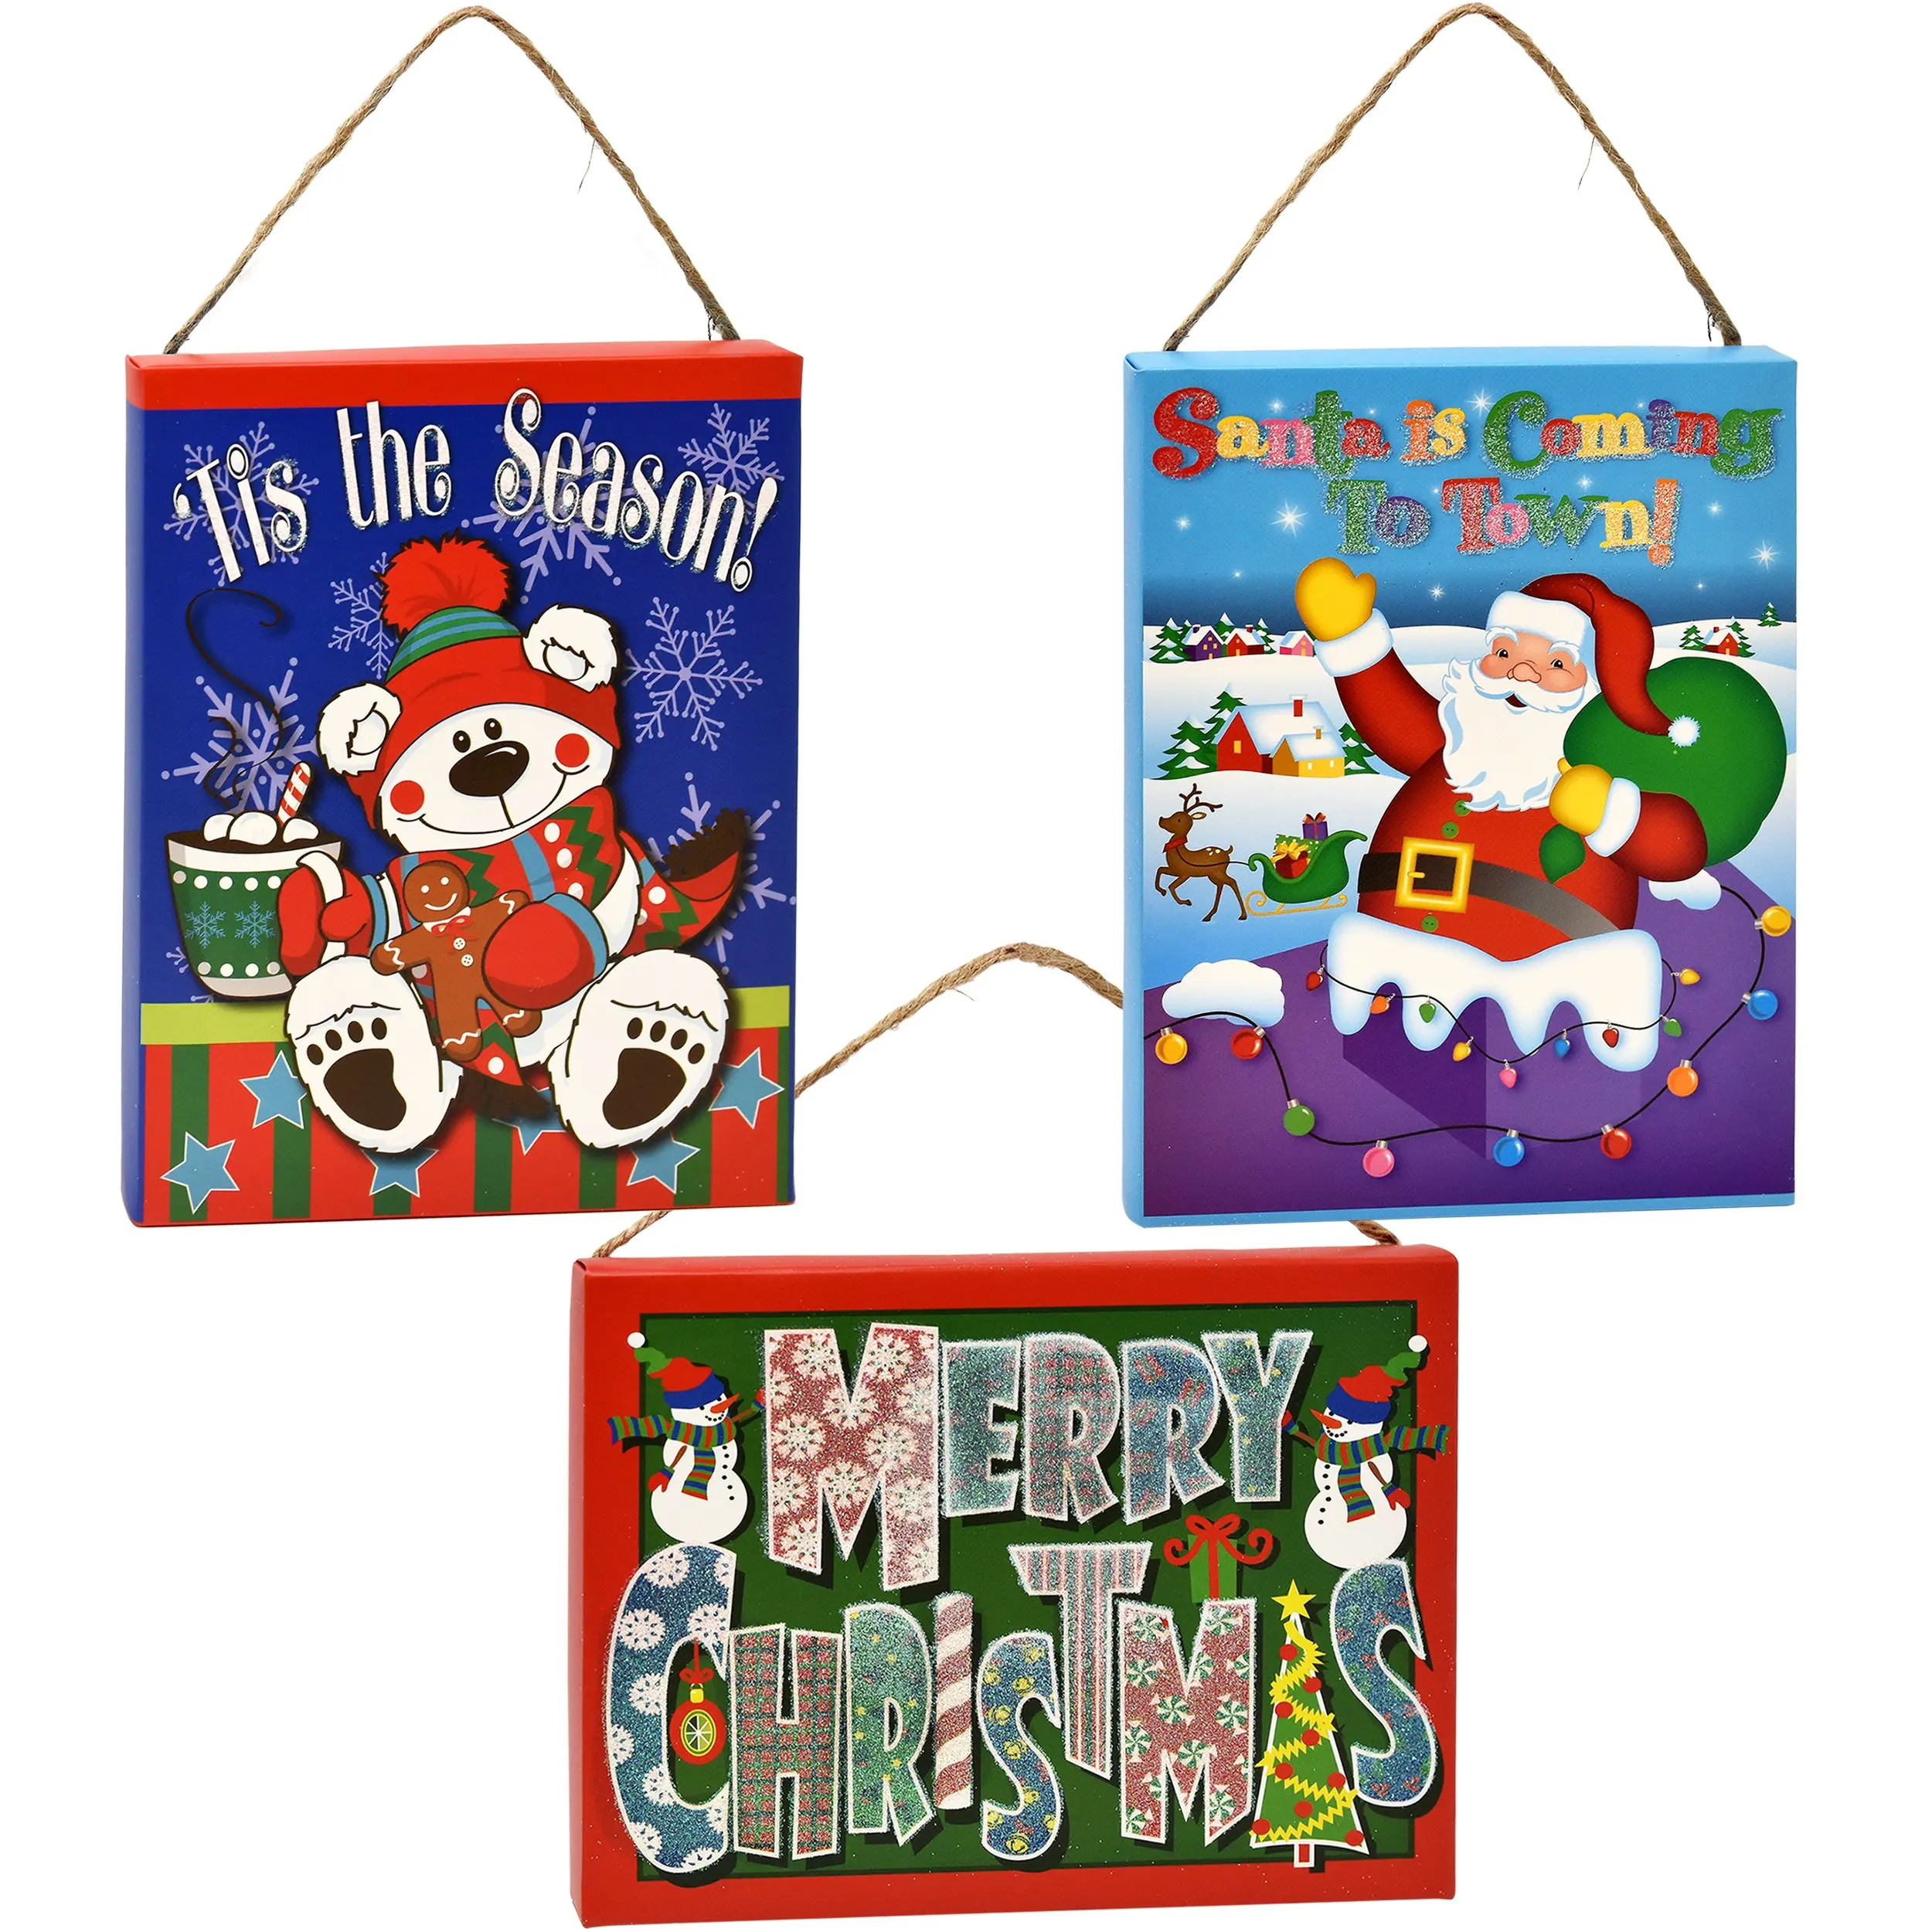 Cheap Christmas Decorations Ideas For Kids Find Christmas Decorations Ideas For Kids Deals On Line At Alibaba Com